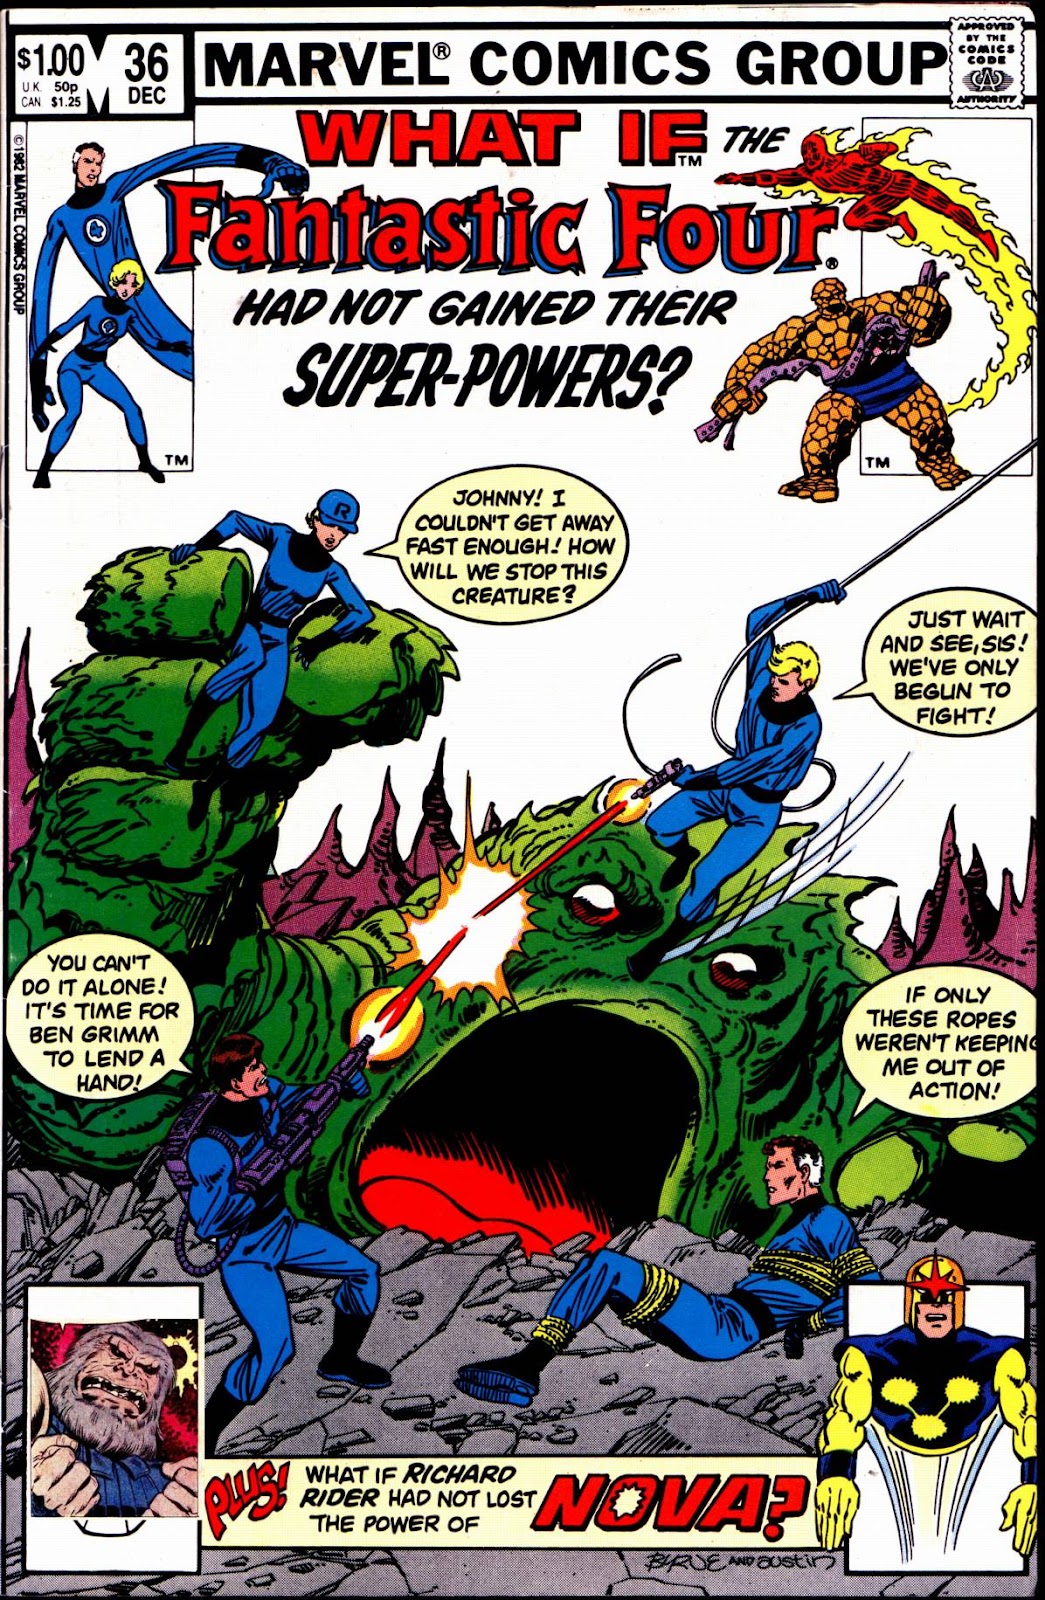 What If? (1977) issue 36 - The Fantastic Four Had Not Gained Their Powers - Page 1